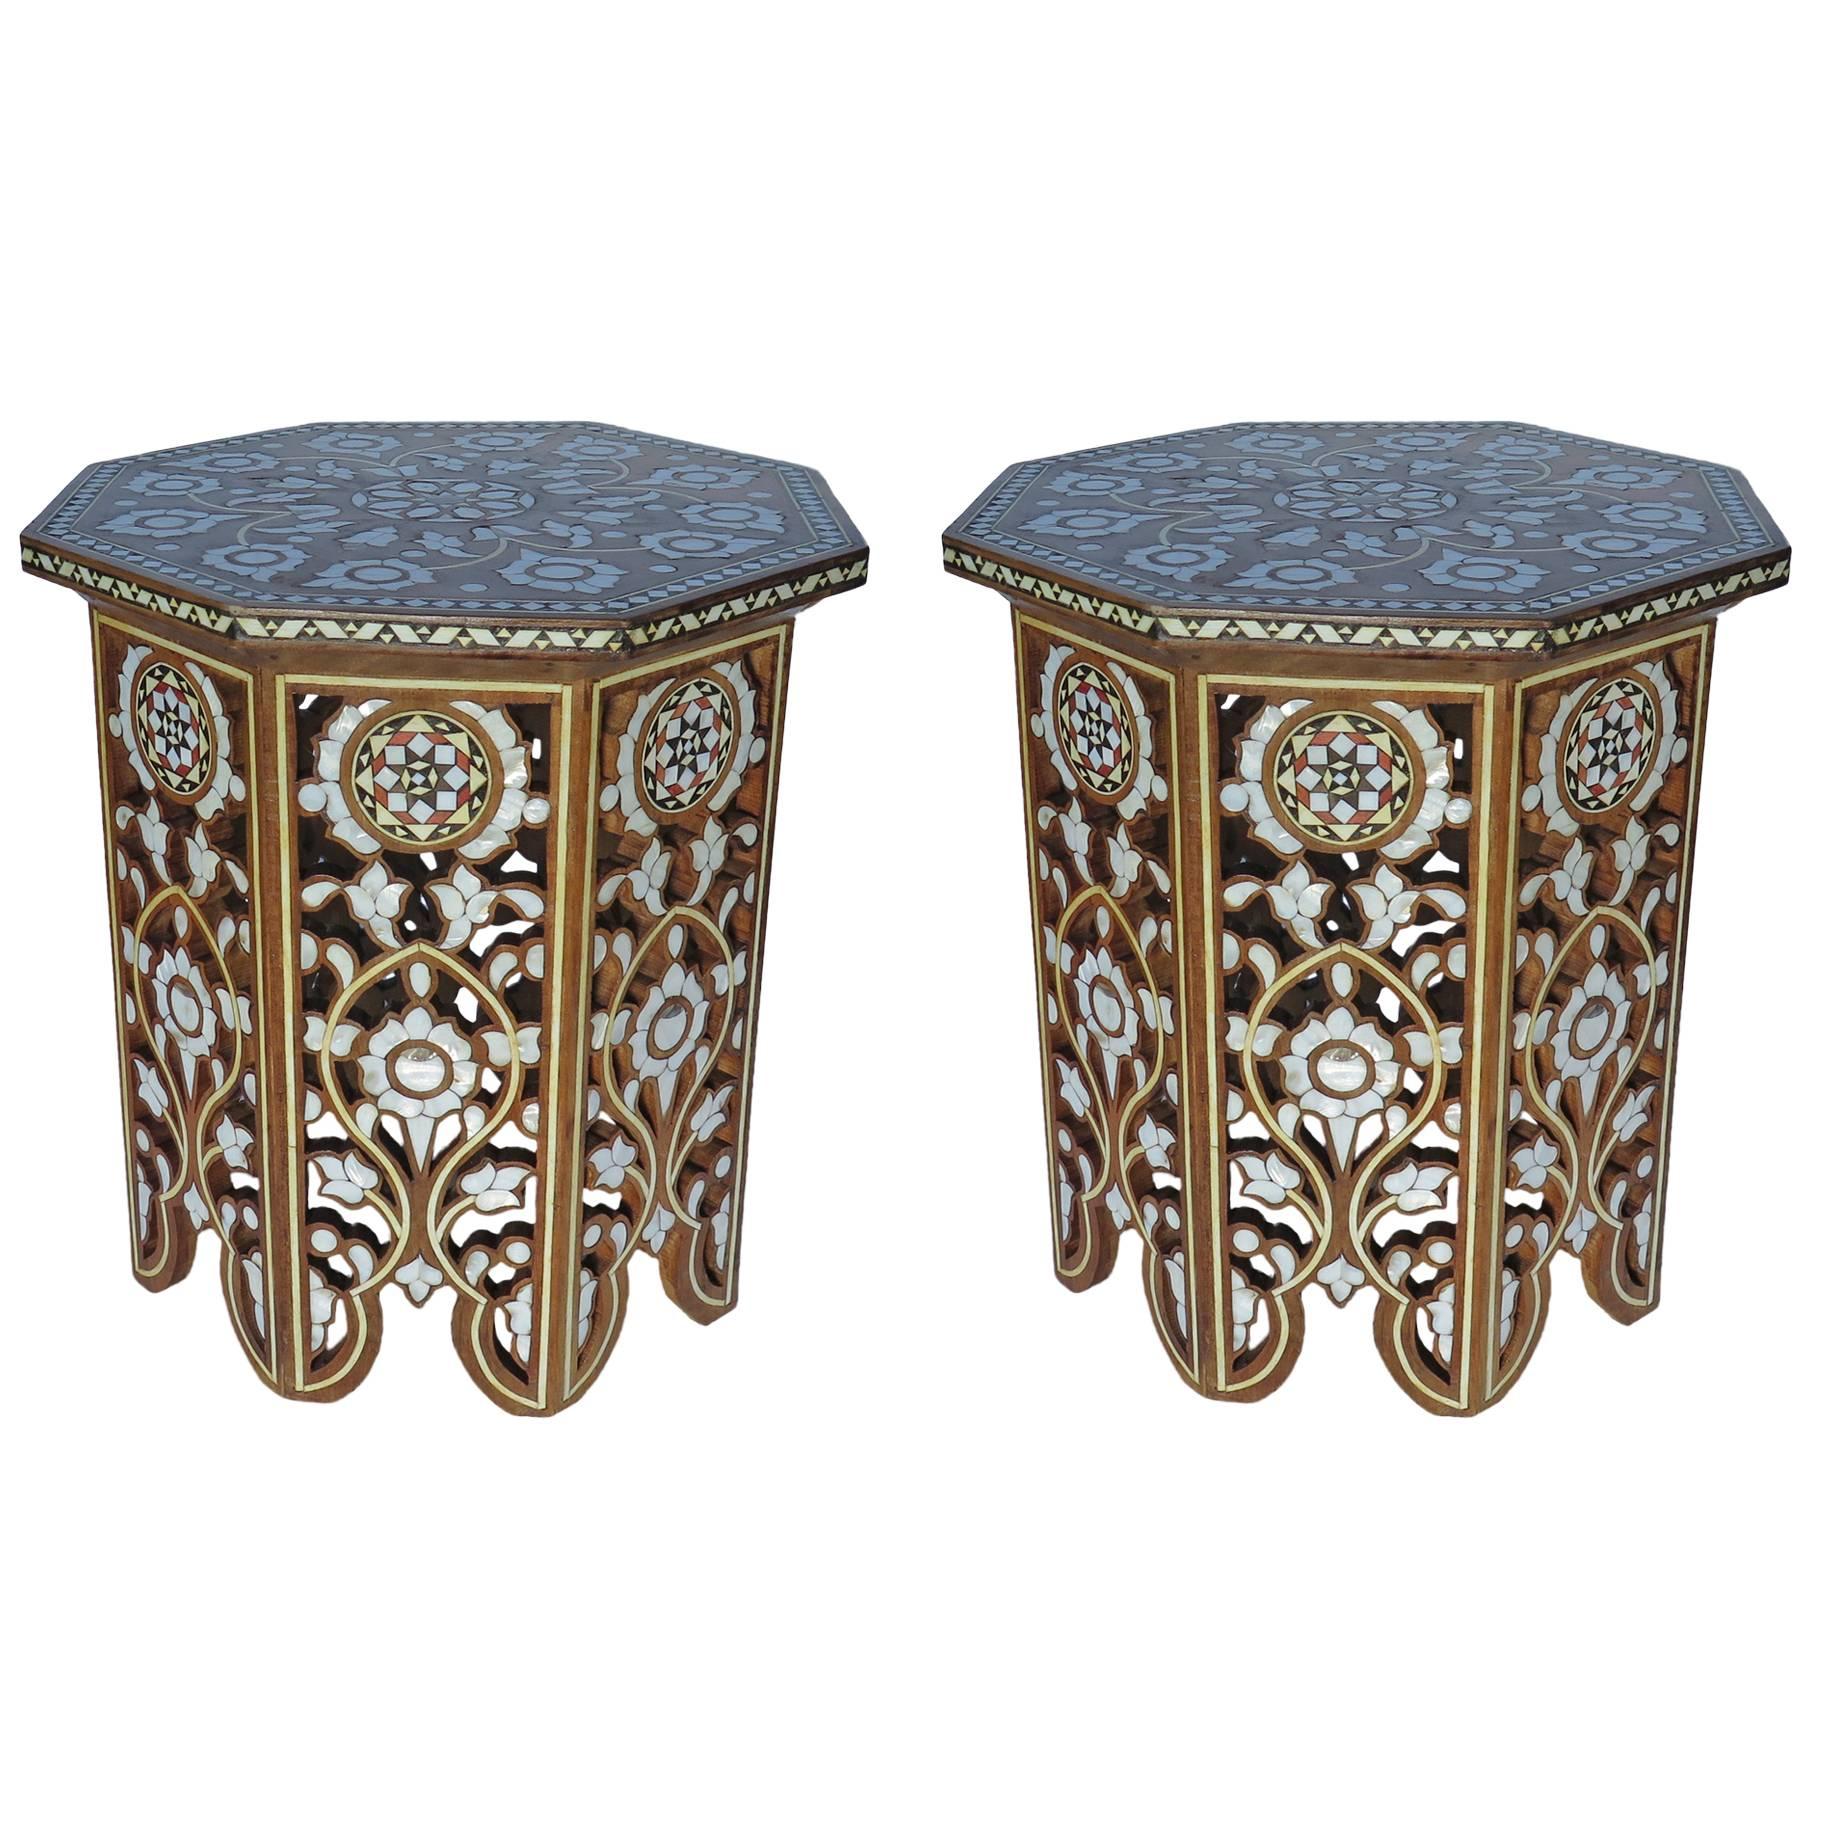 Pair of Moorish Mother-of-Pearl Inlay Side Tables